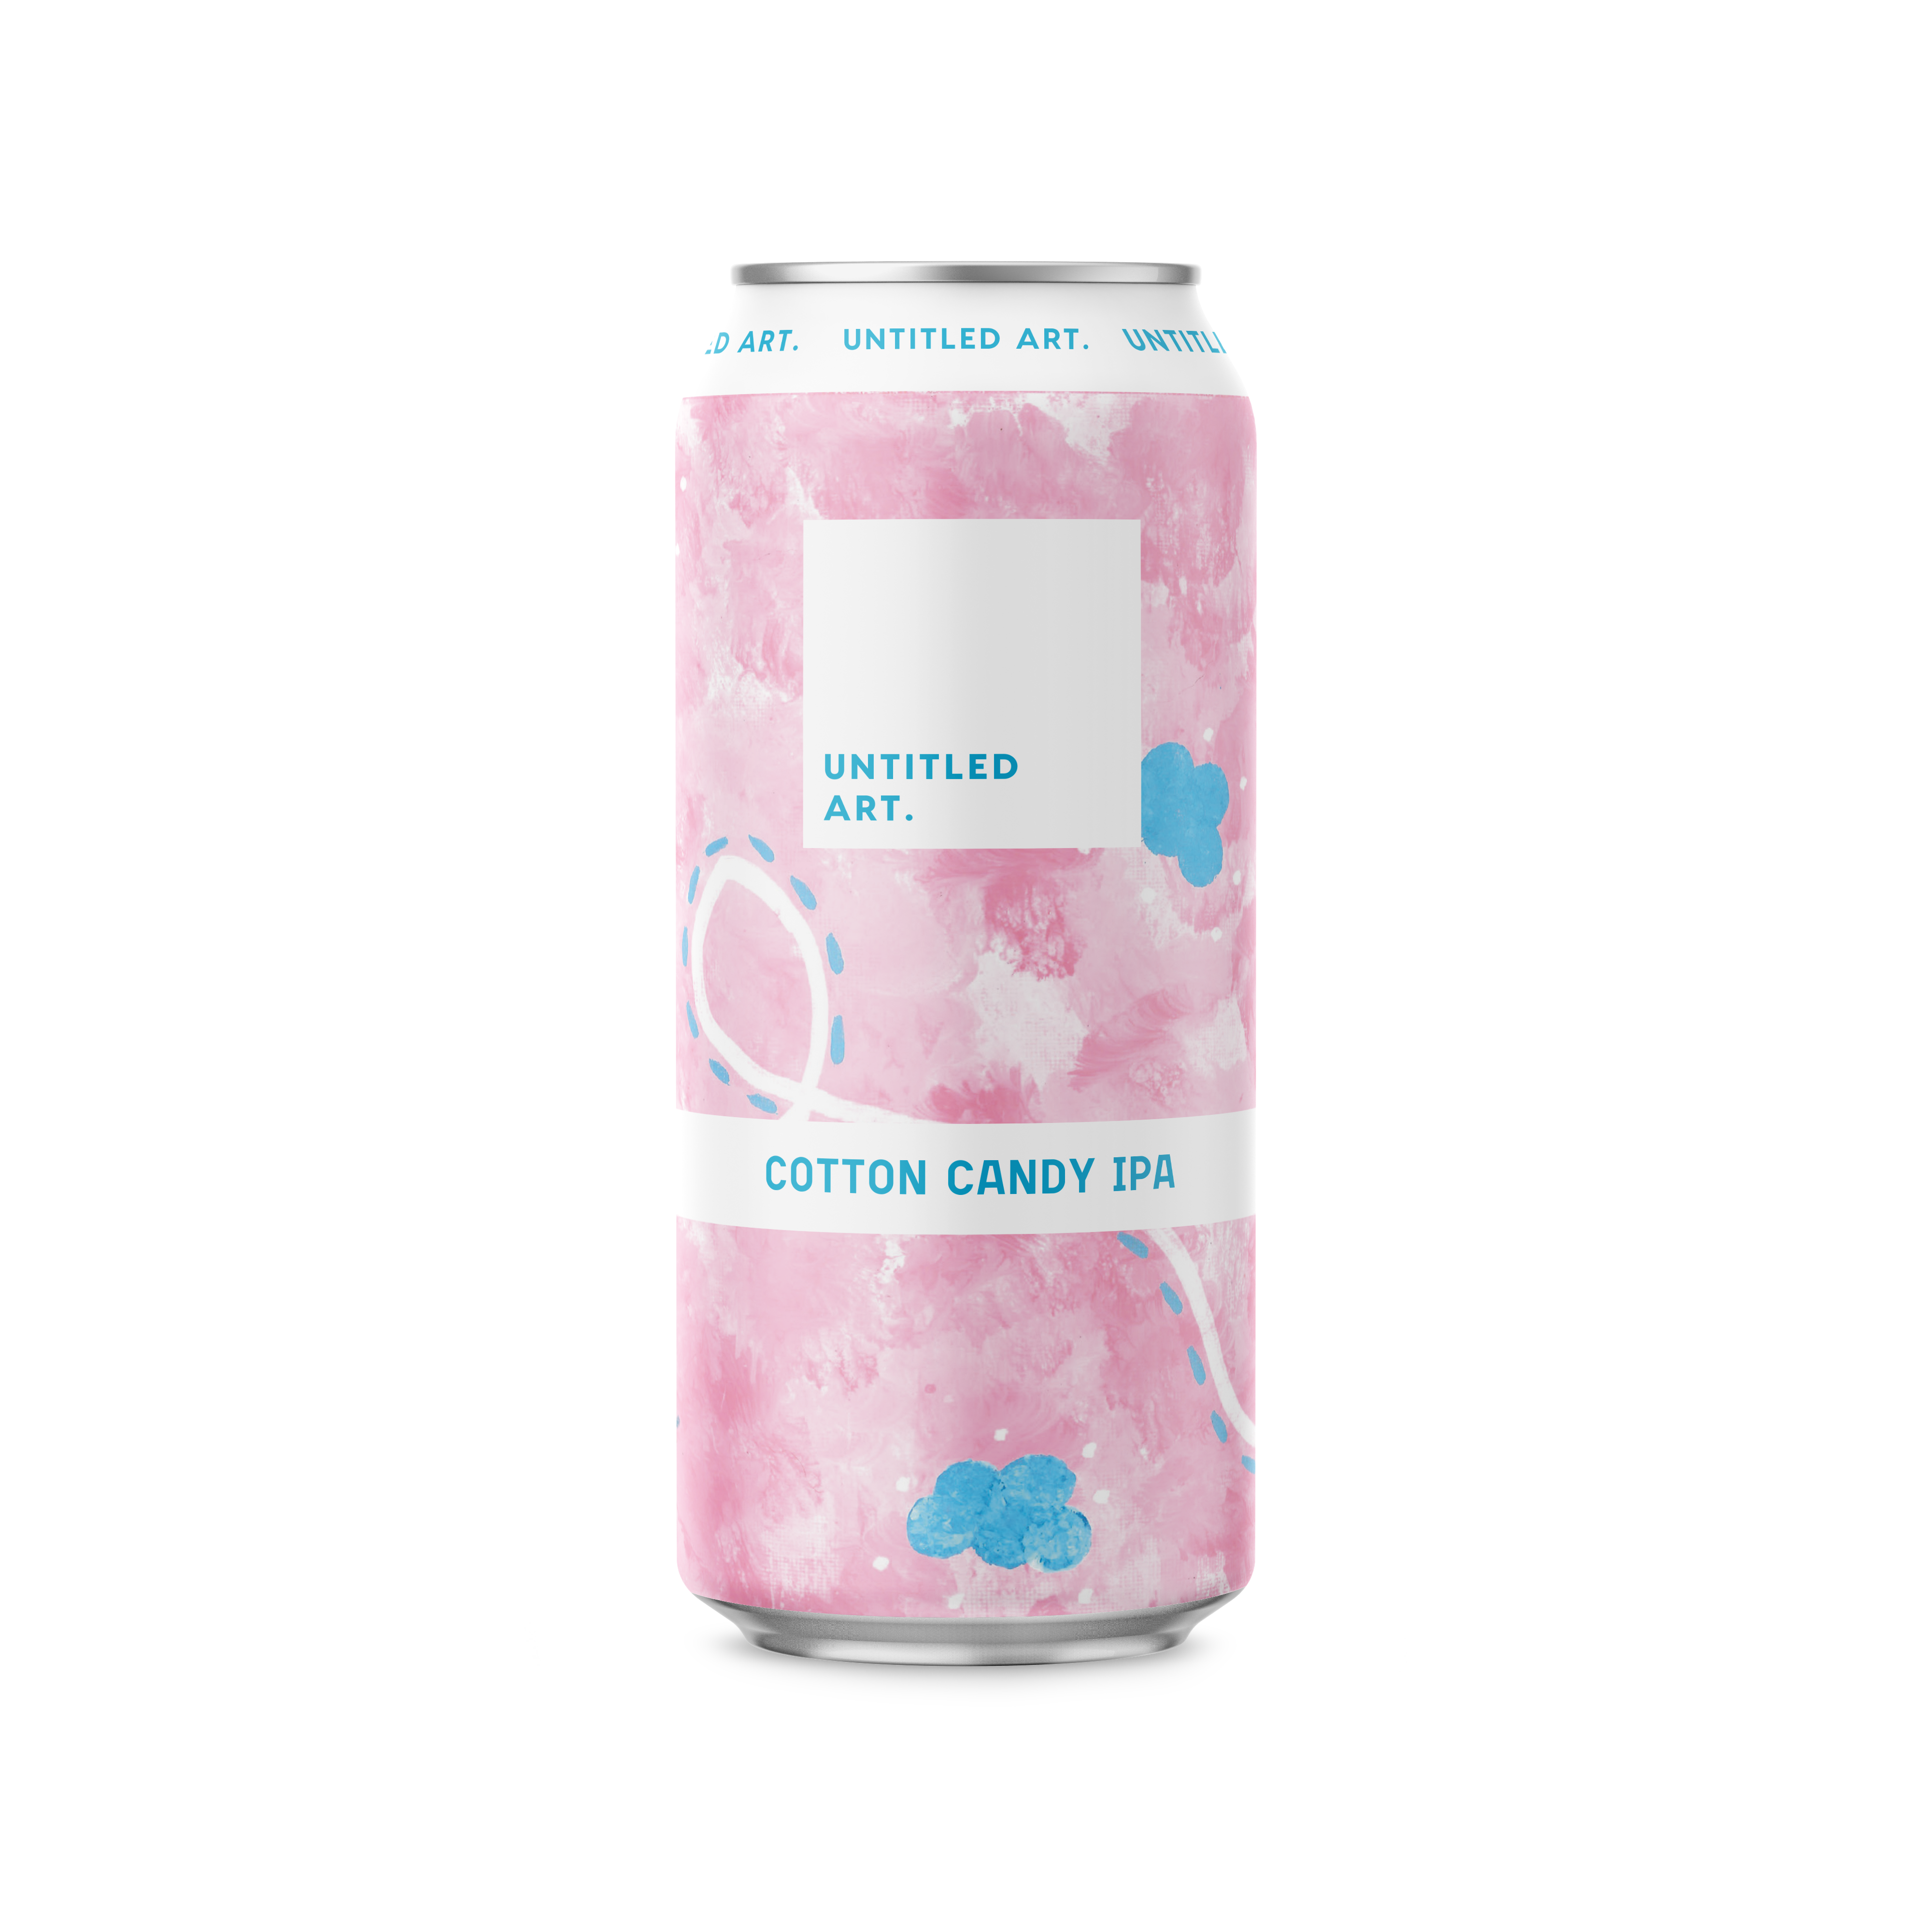 A can with a pink and white design on it.